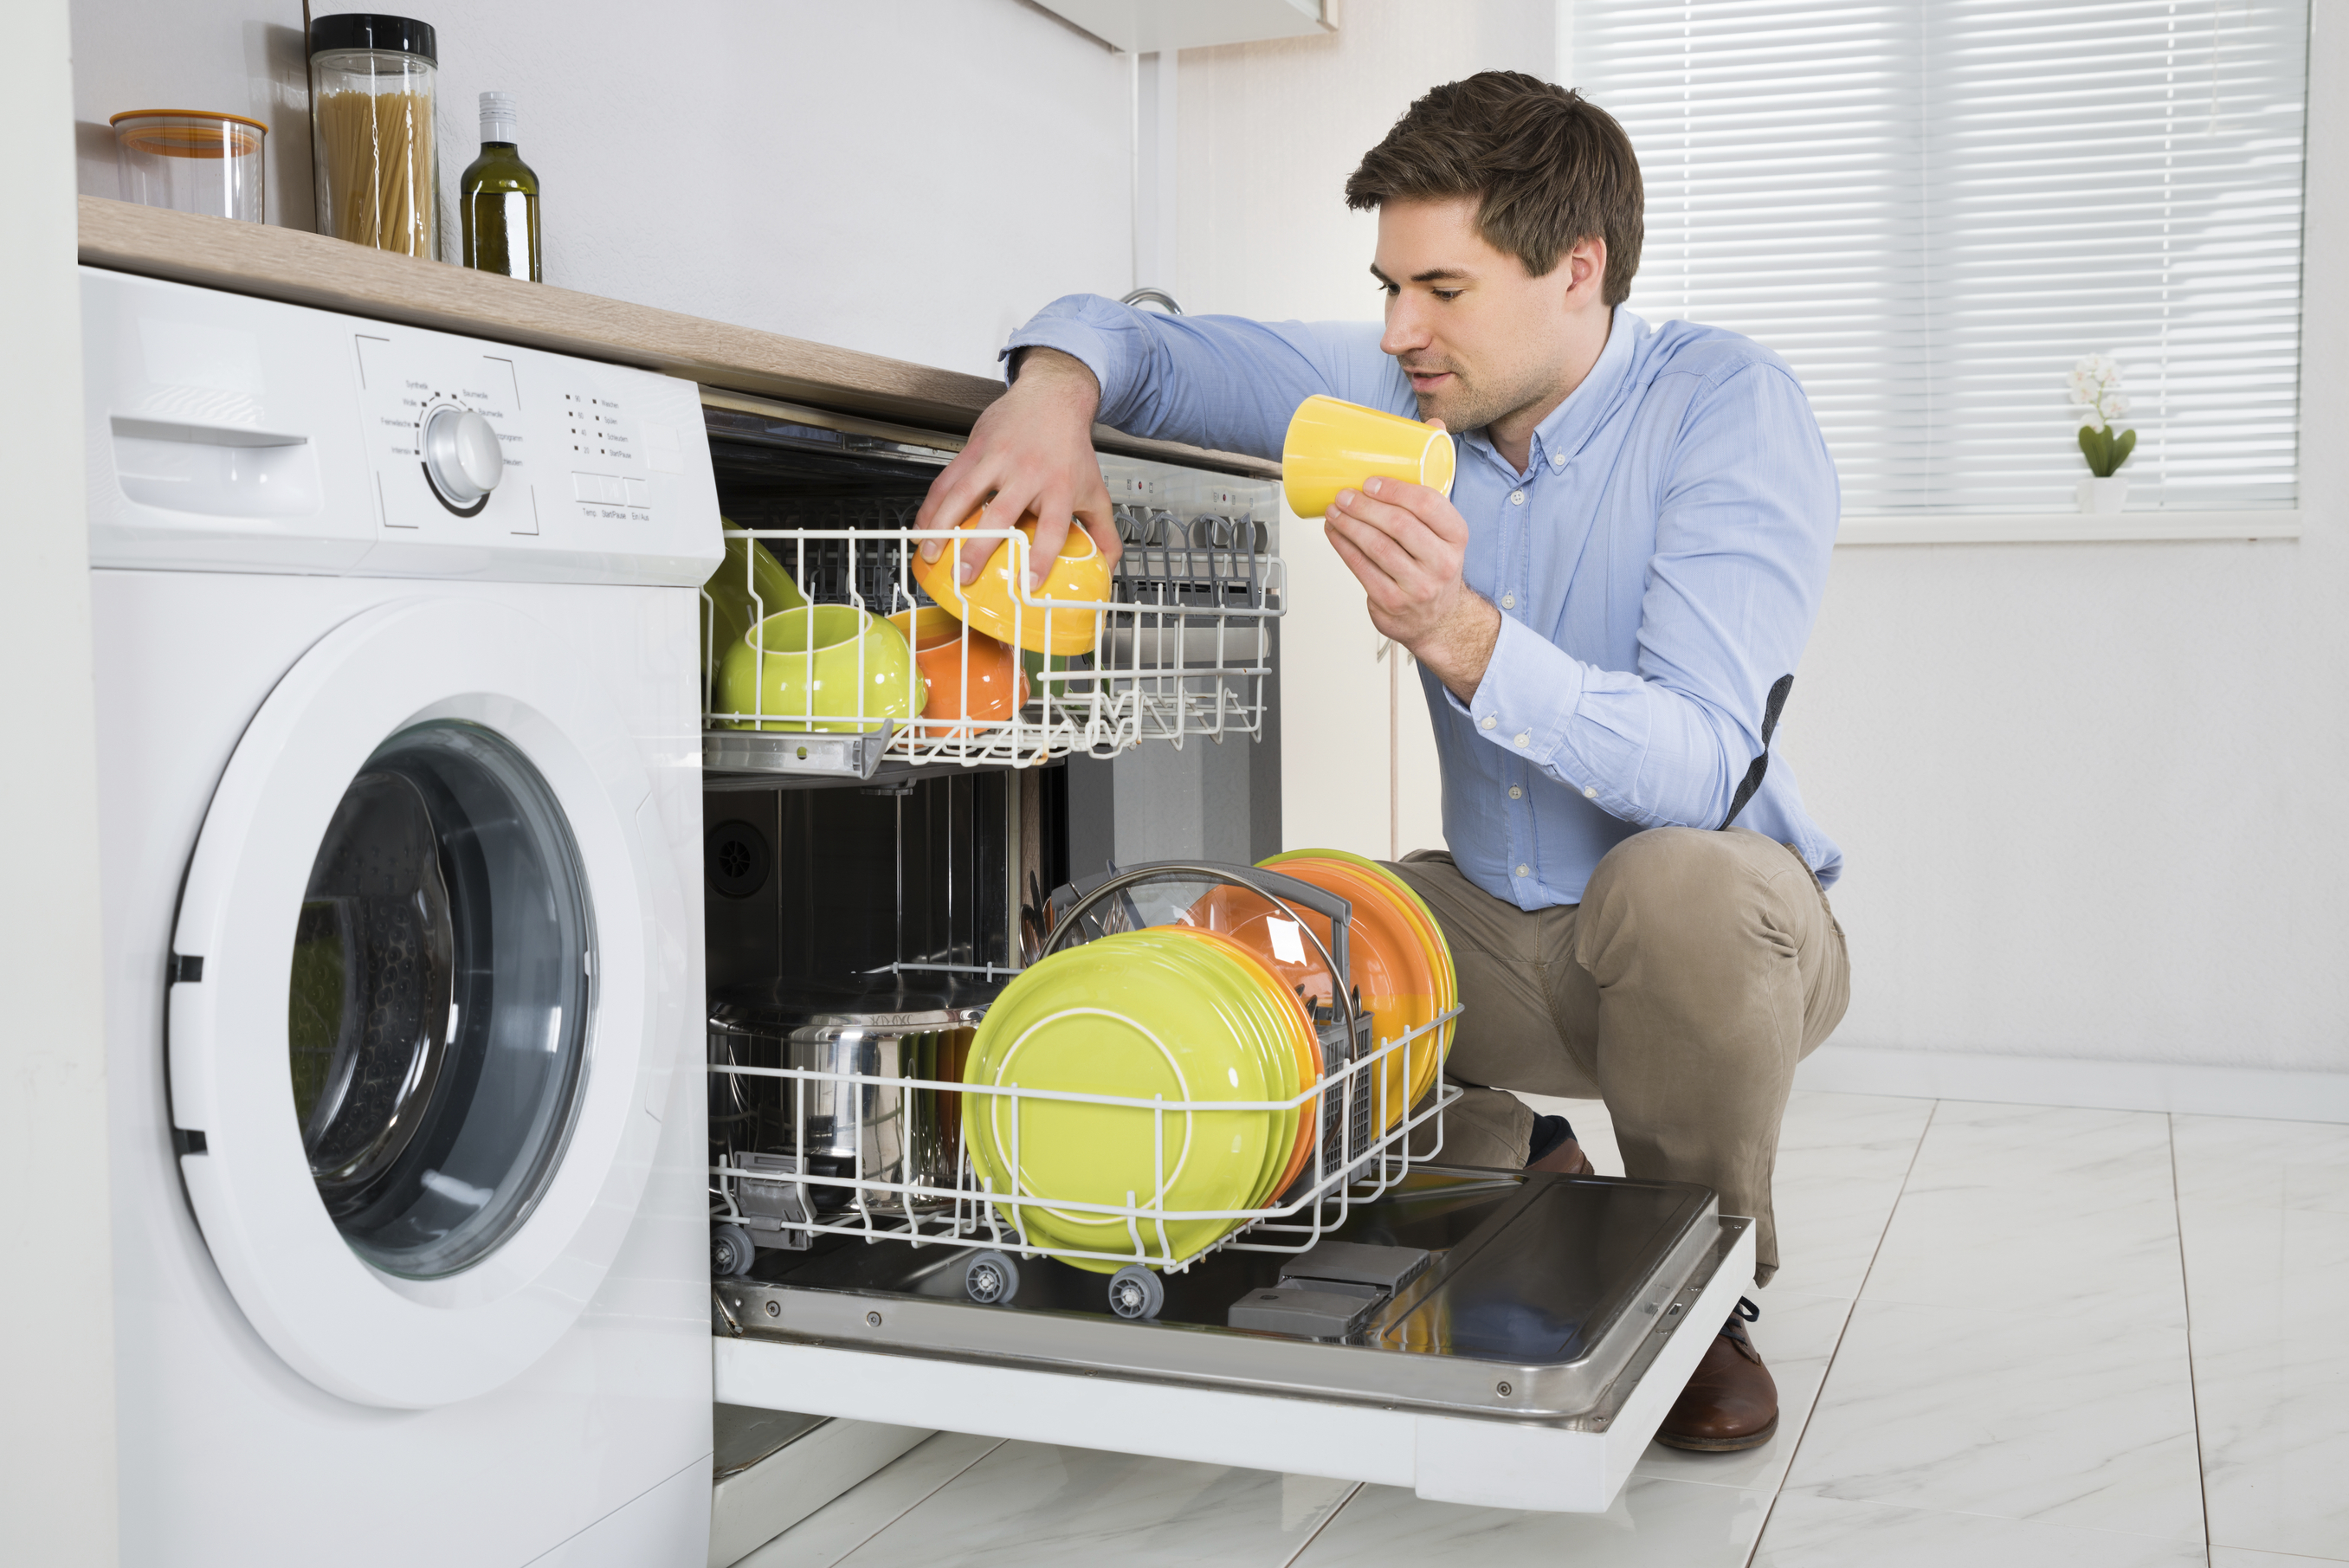 glotech-repairs-why-is-my-dishwasher-not-cleaning-properly-glotech